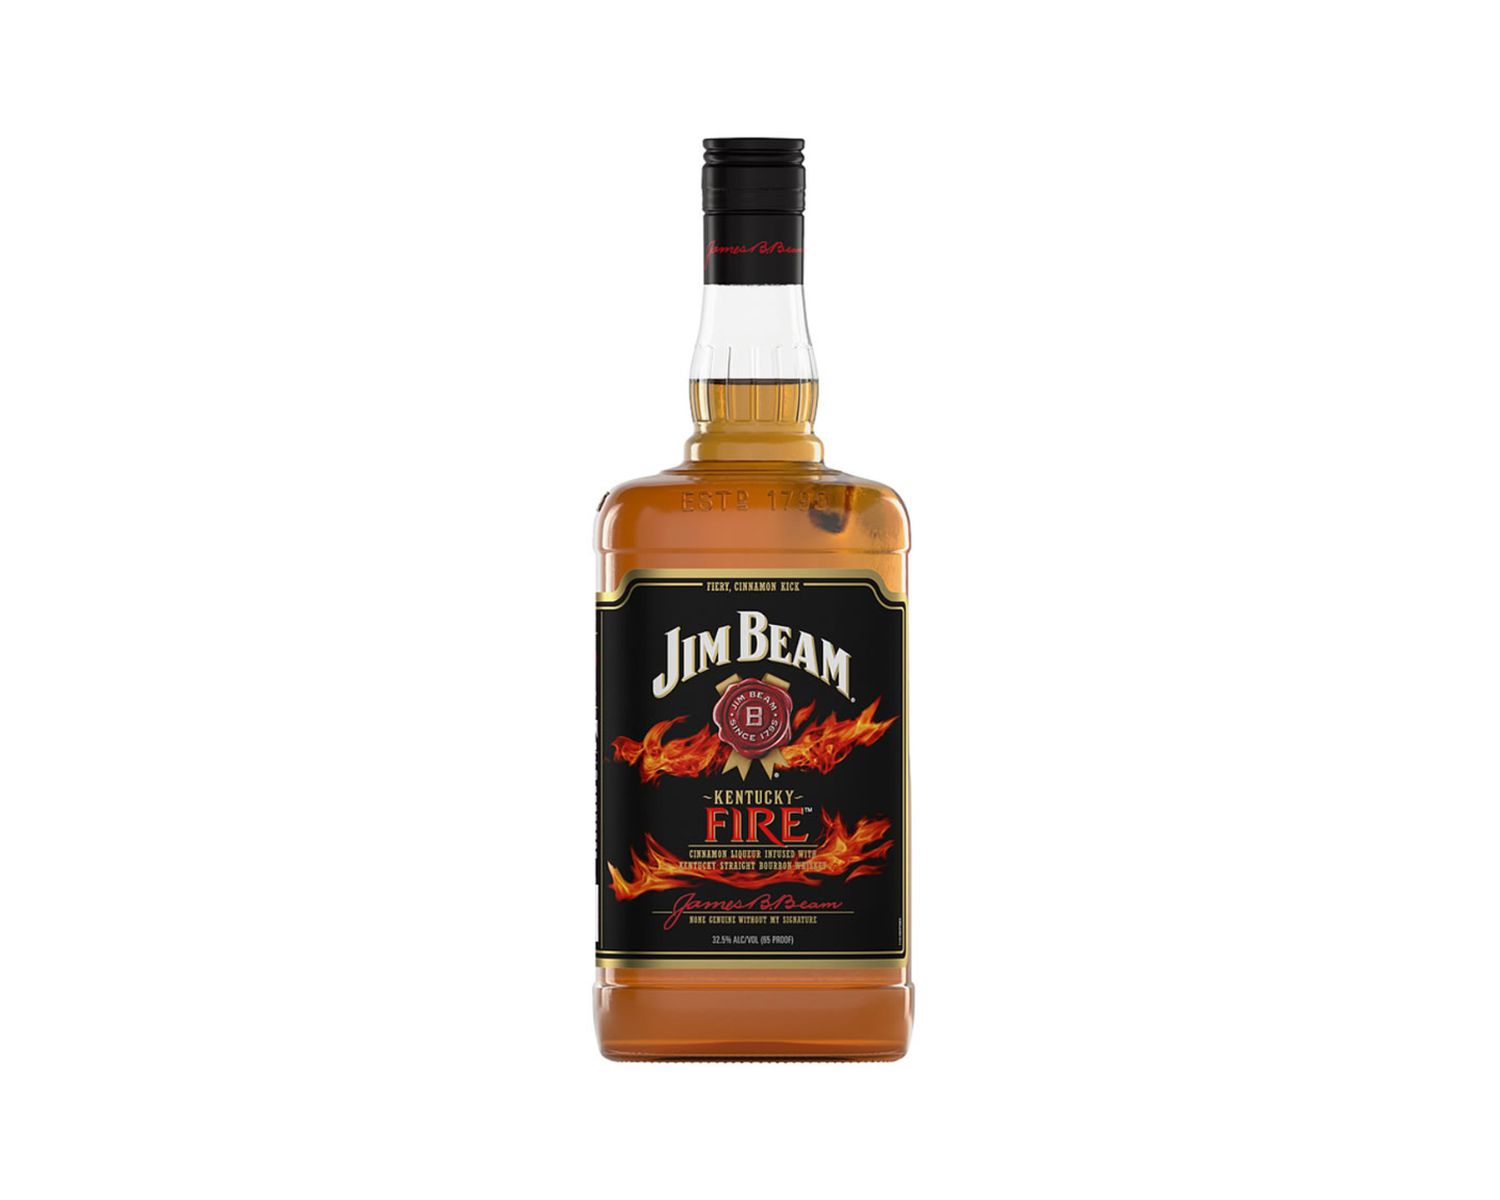 19-jim-beam-fire-nutrition-facts